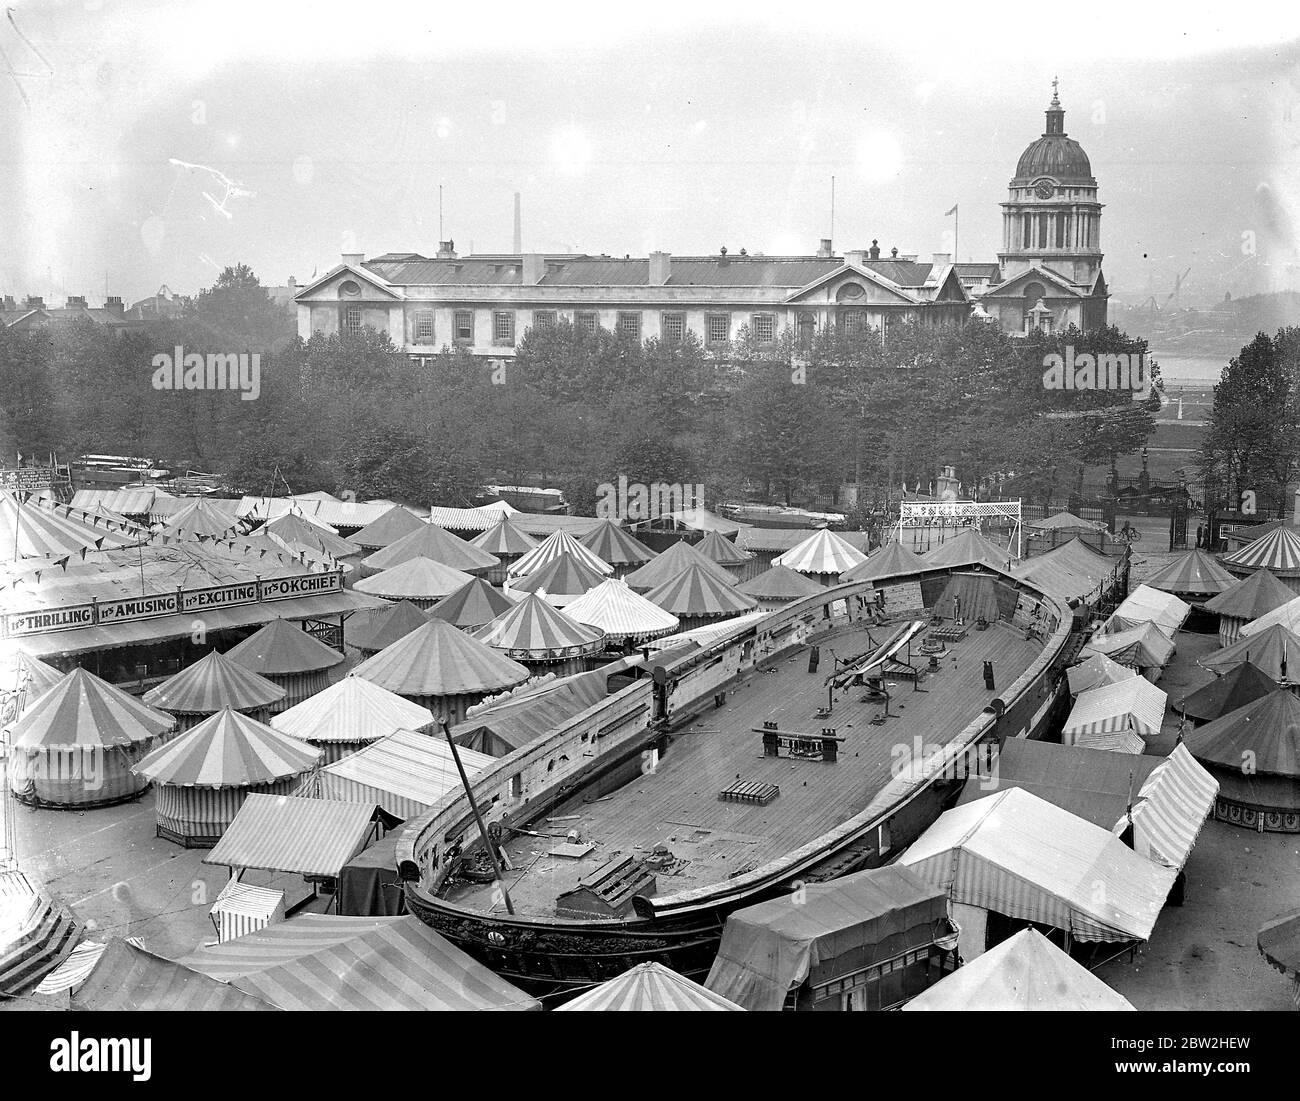 A general view of the fair in the grounds of the Royal Hospital School, Greenwich, London, in aid of the Dreadnought and Miller General Hospitals. The training ship can be seen in the centre, with the Royal Naval College in background. 26 September 1933 Stock Photo